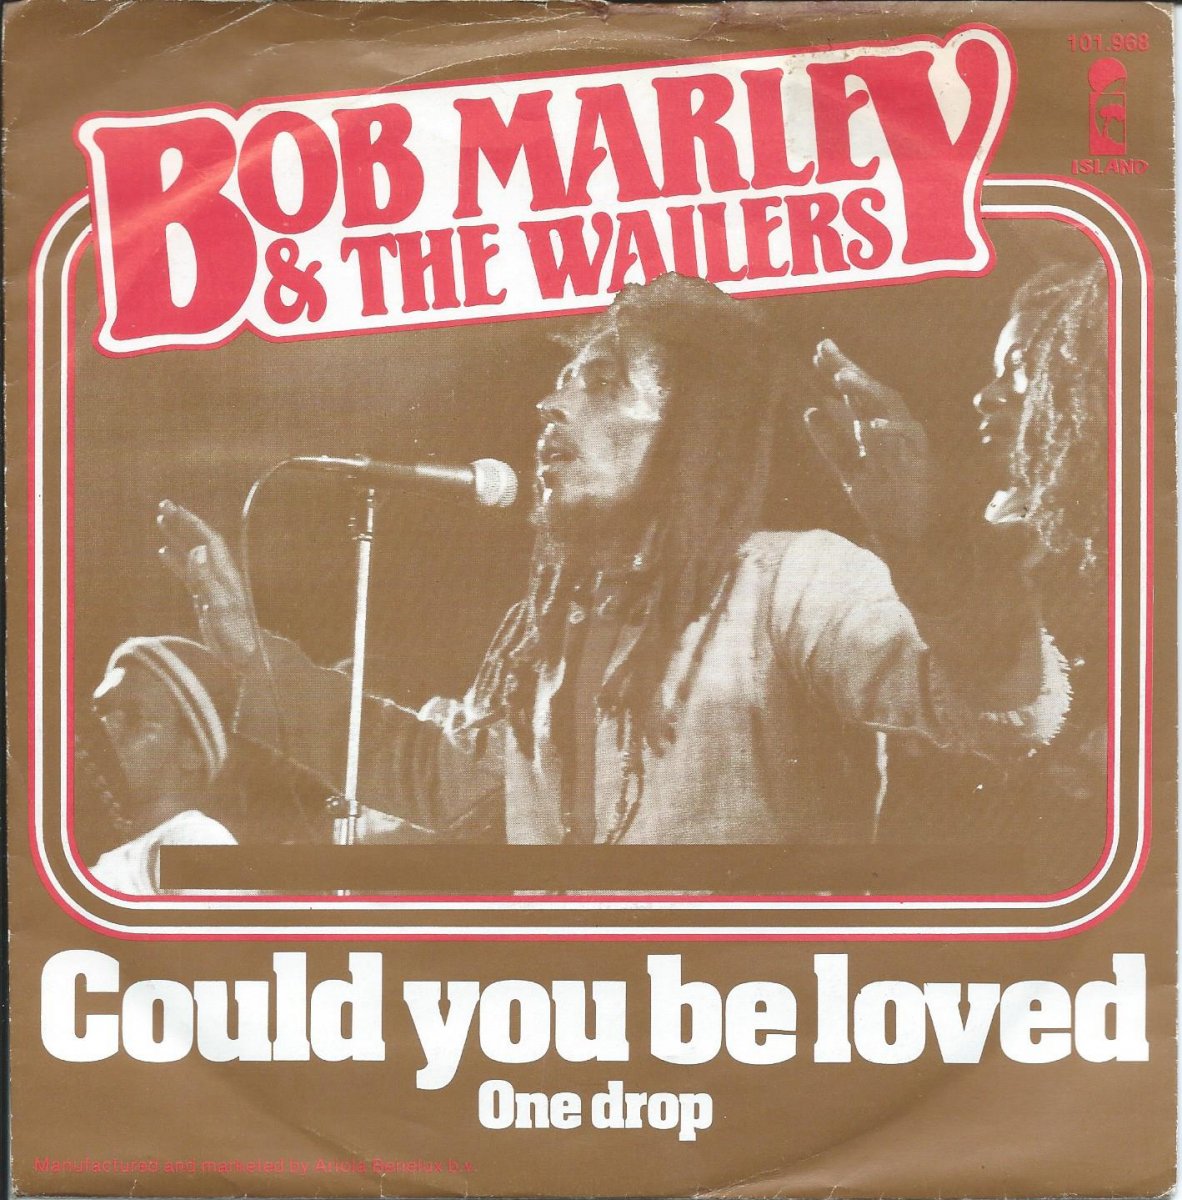 BOB MARLEY & THE WAILERS / COULD YOU BE LOVED / ONE DROP (7